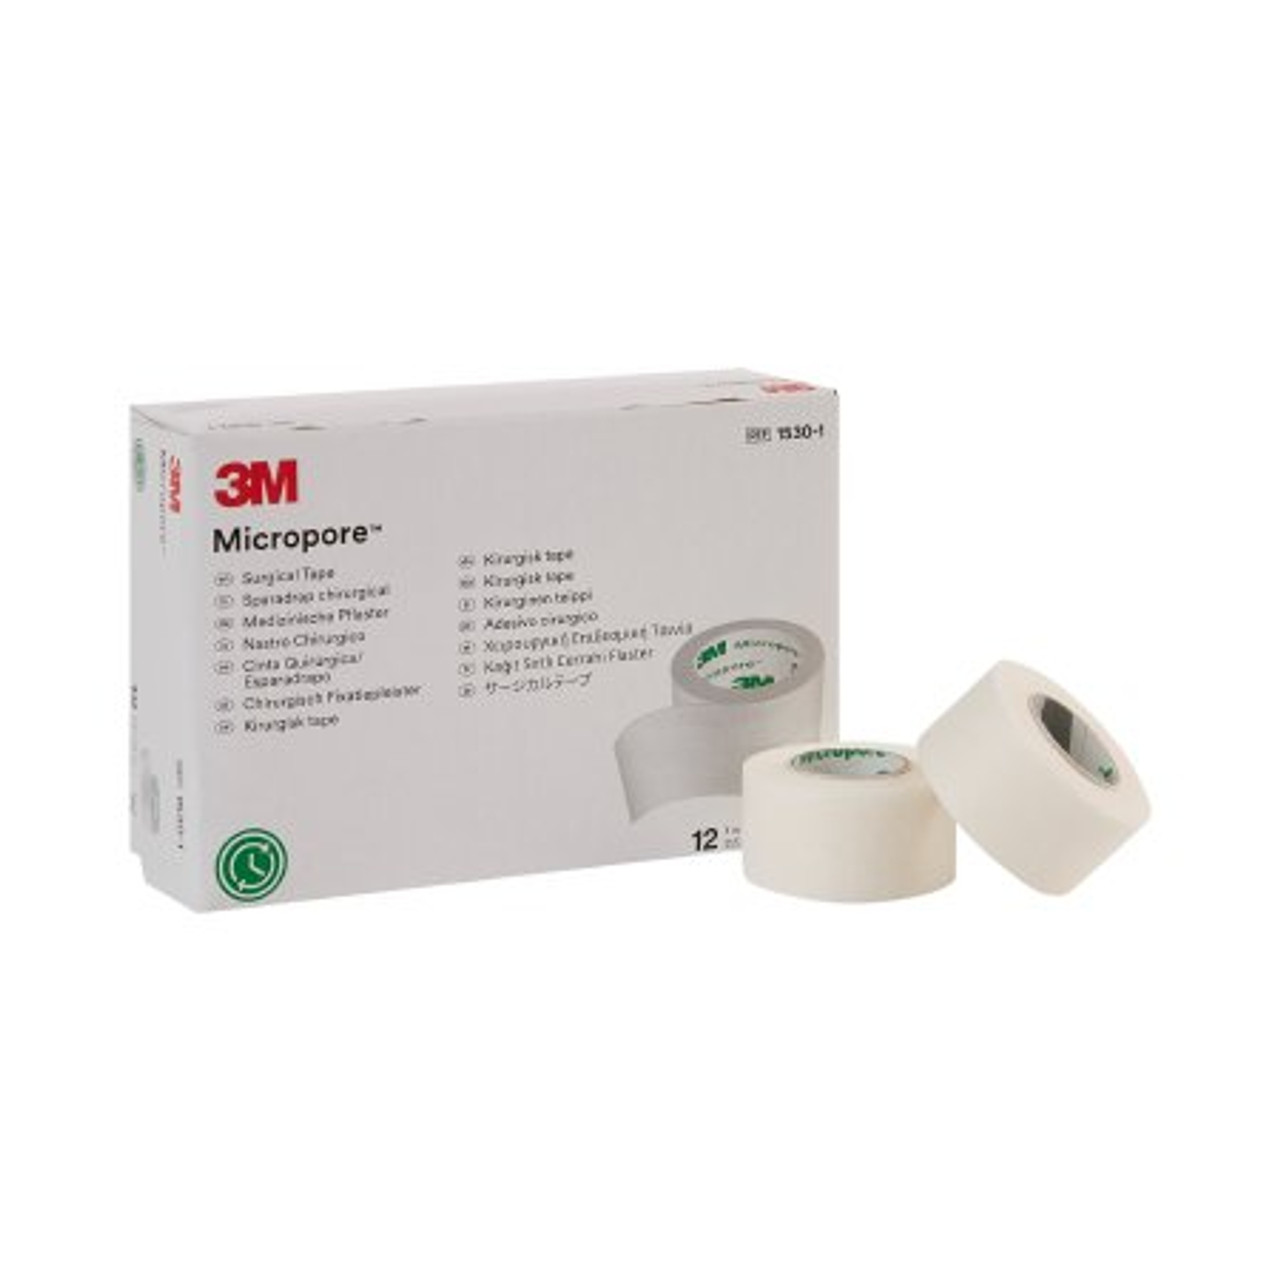 3m Medical Tape Micropore Paper 1 X 10 Yd Nonsterile (#1530-1, Sold  Perpiece)